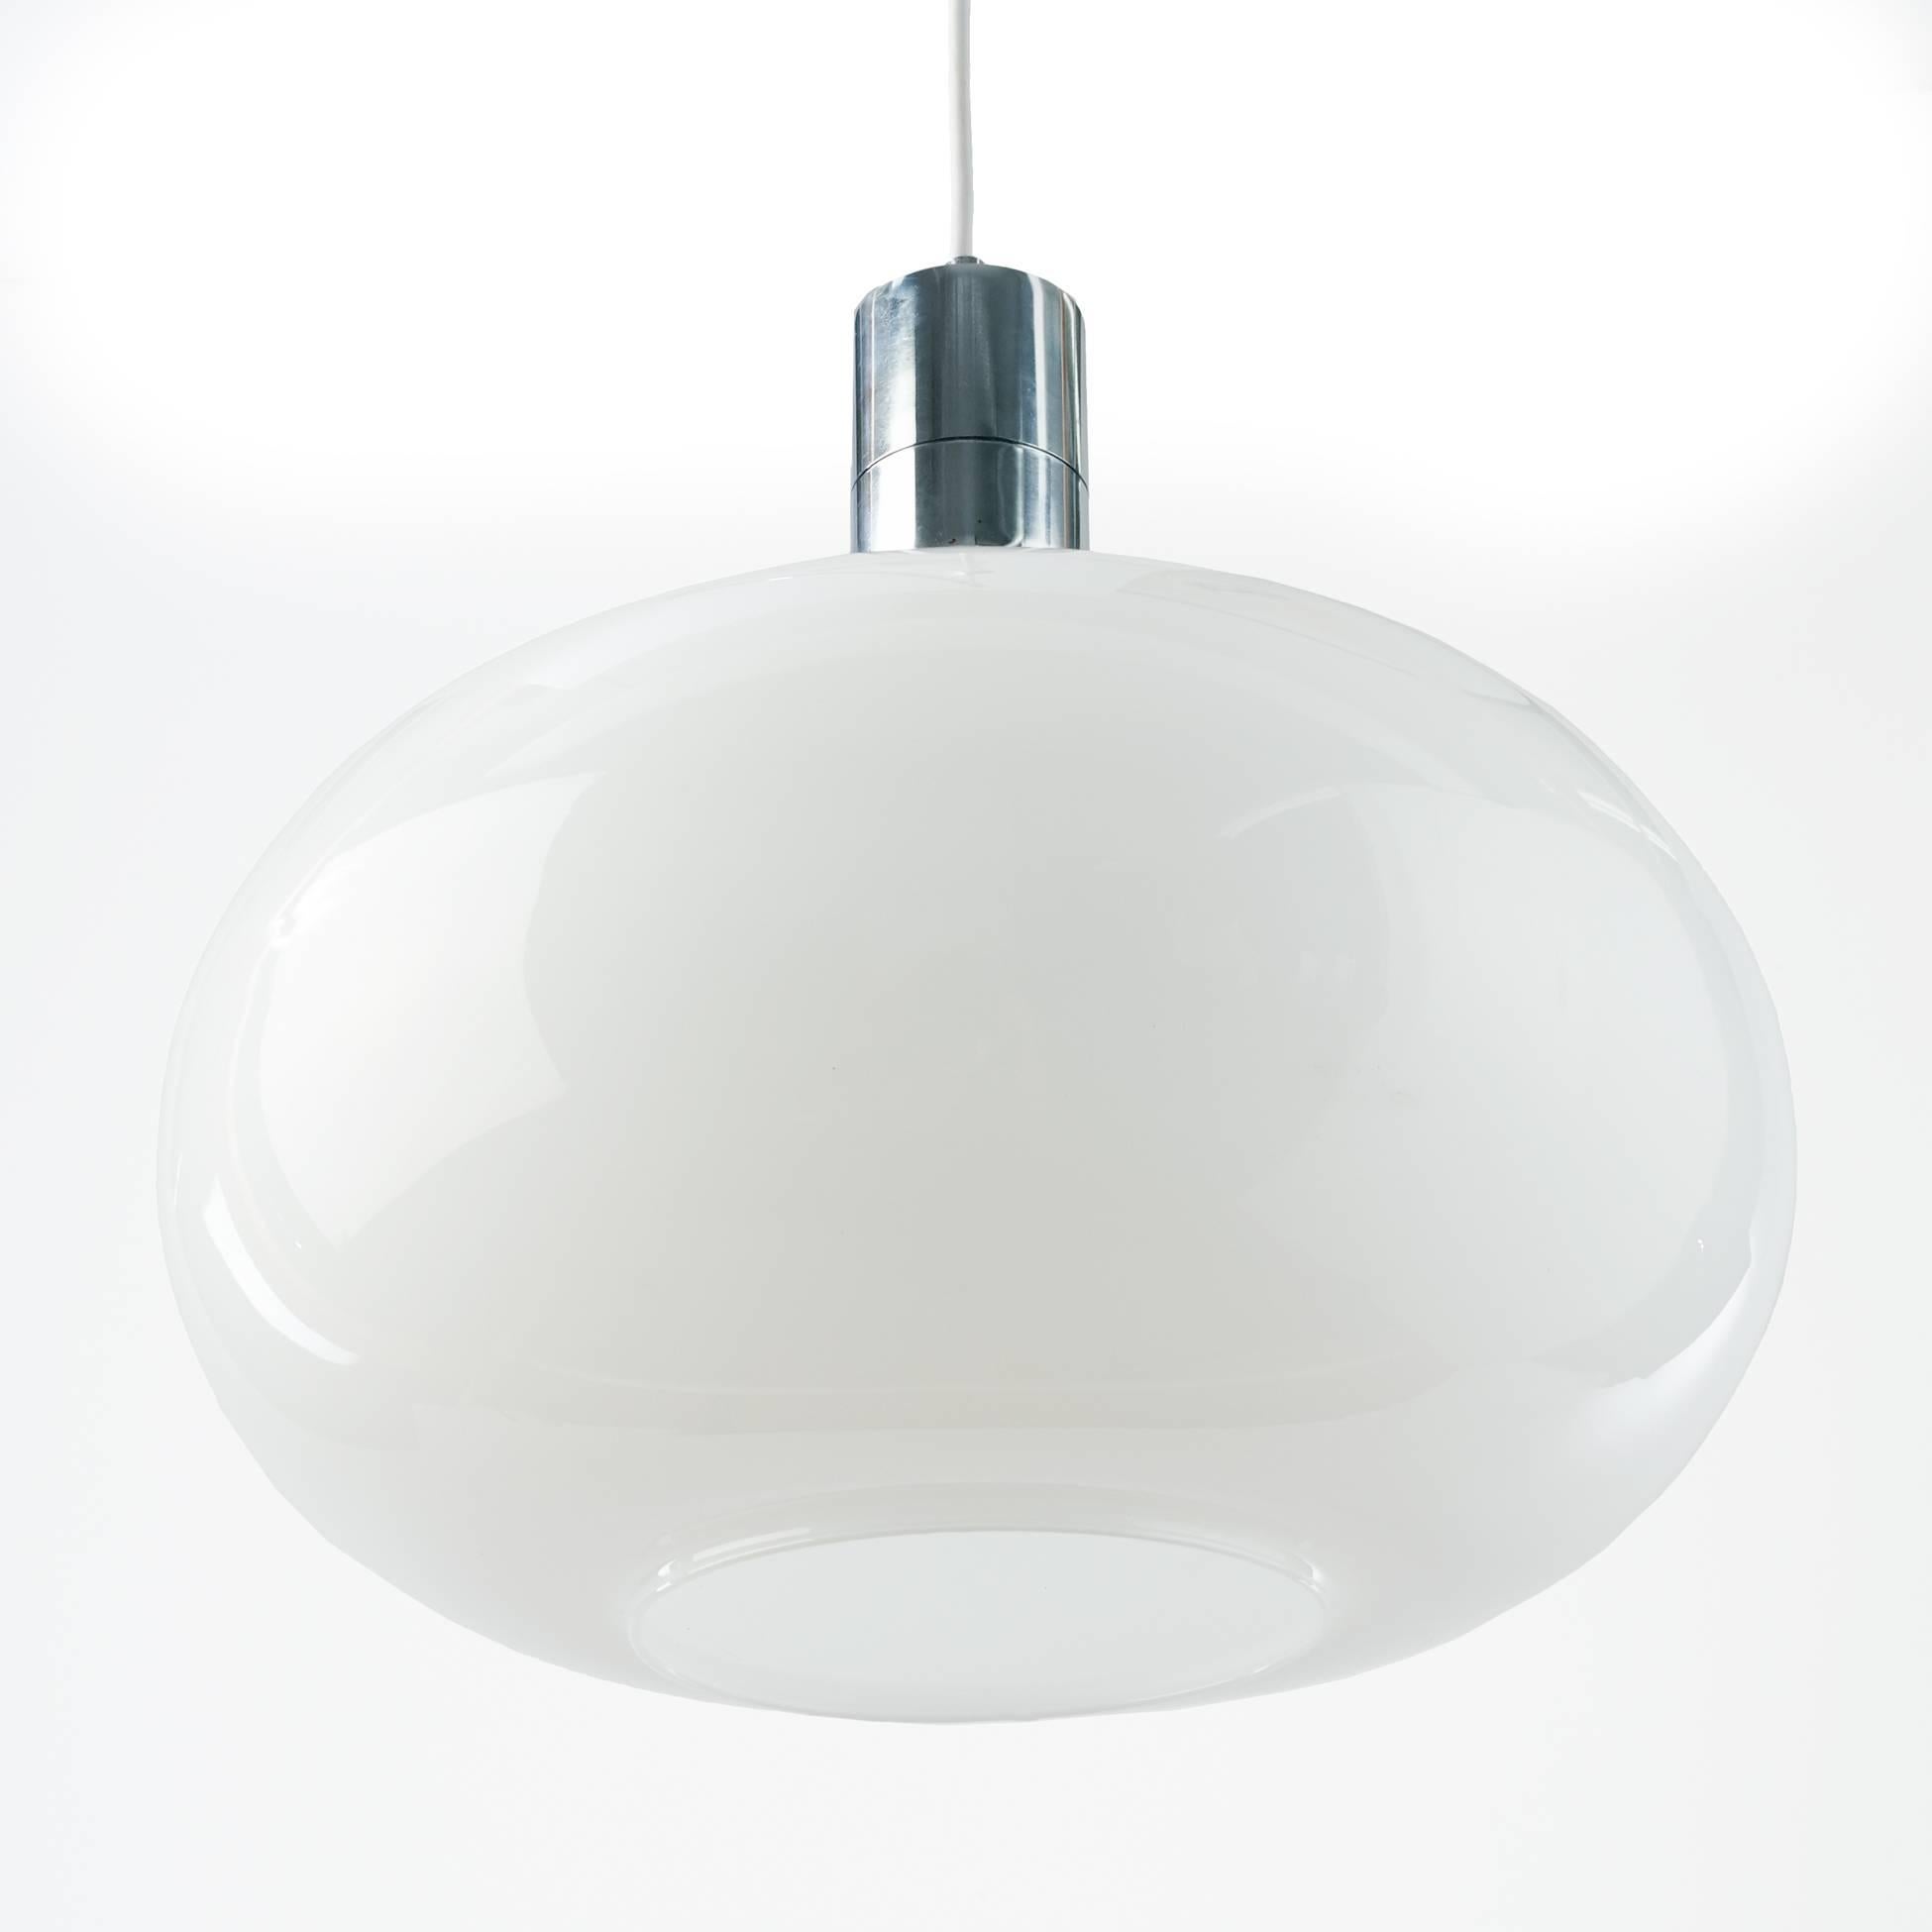 movable ceiling light